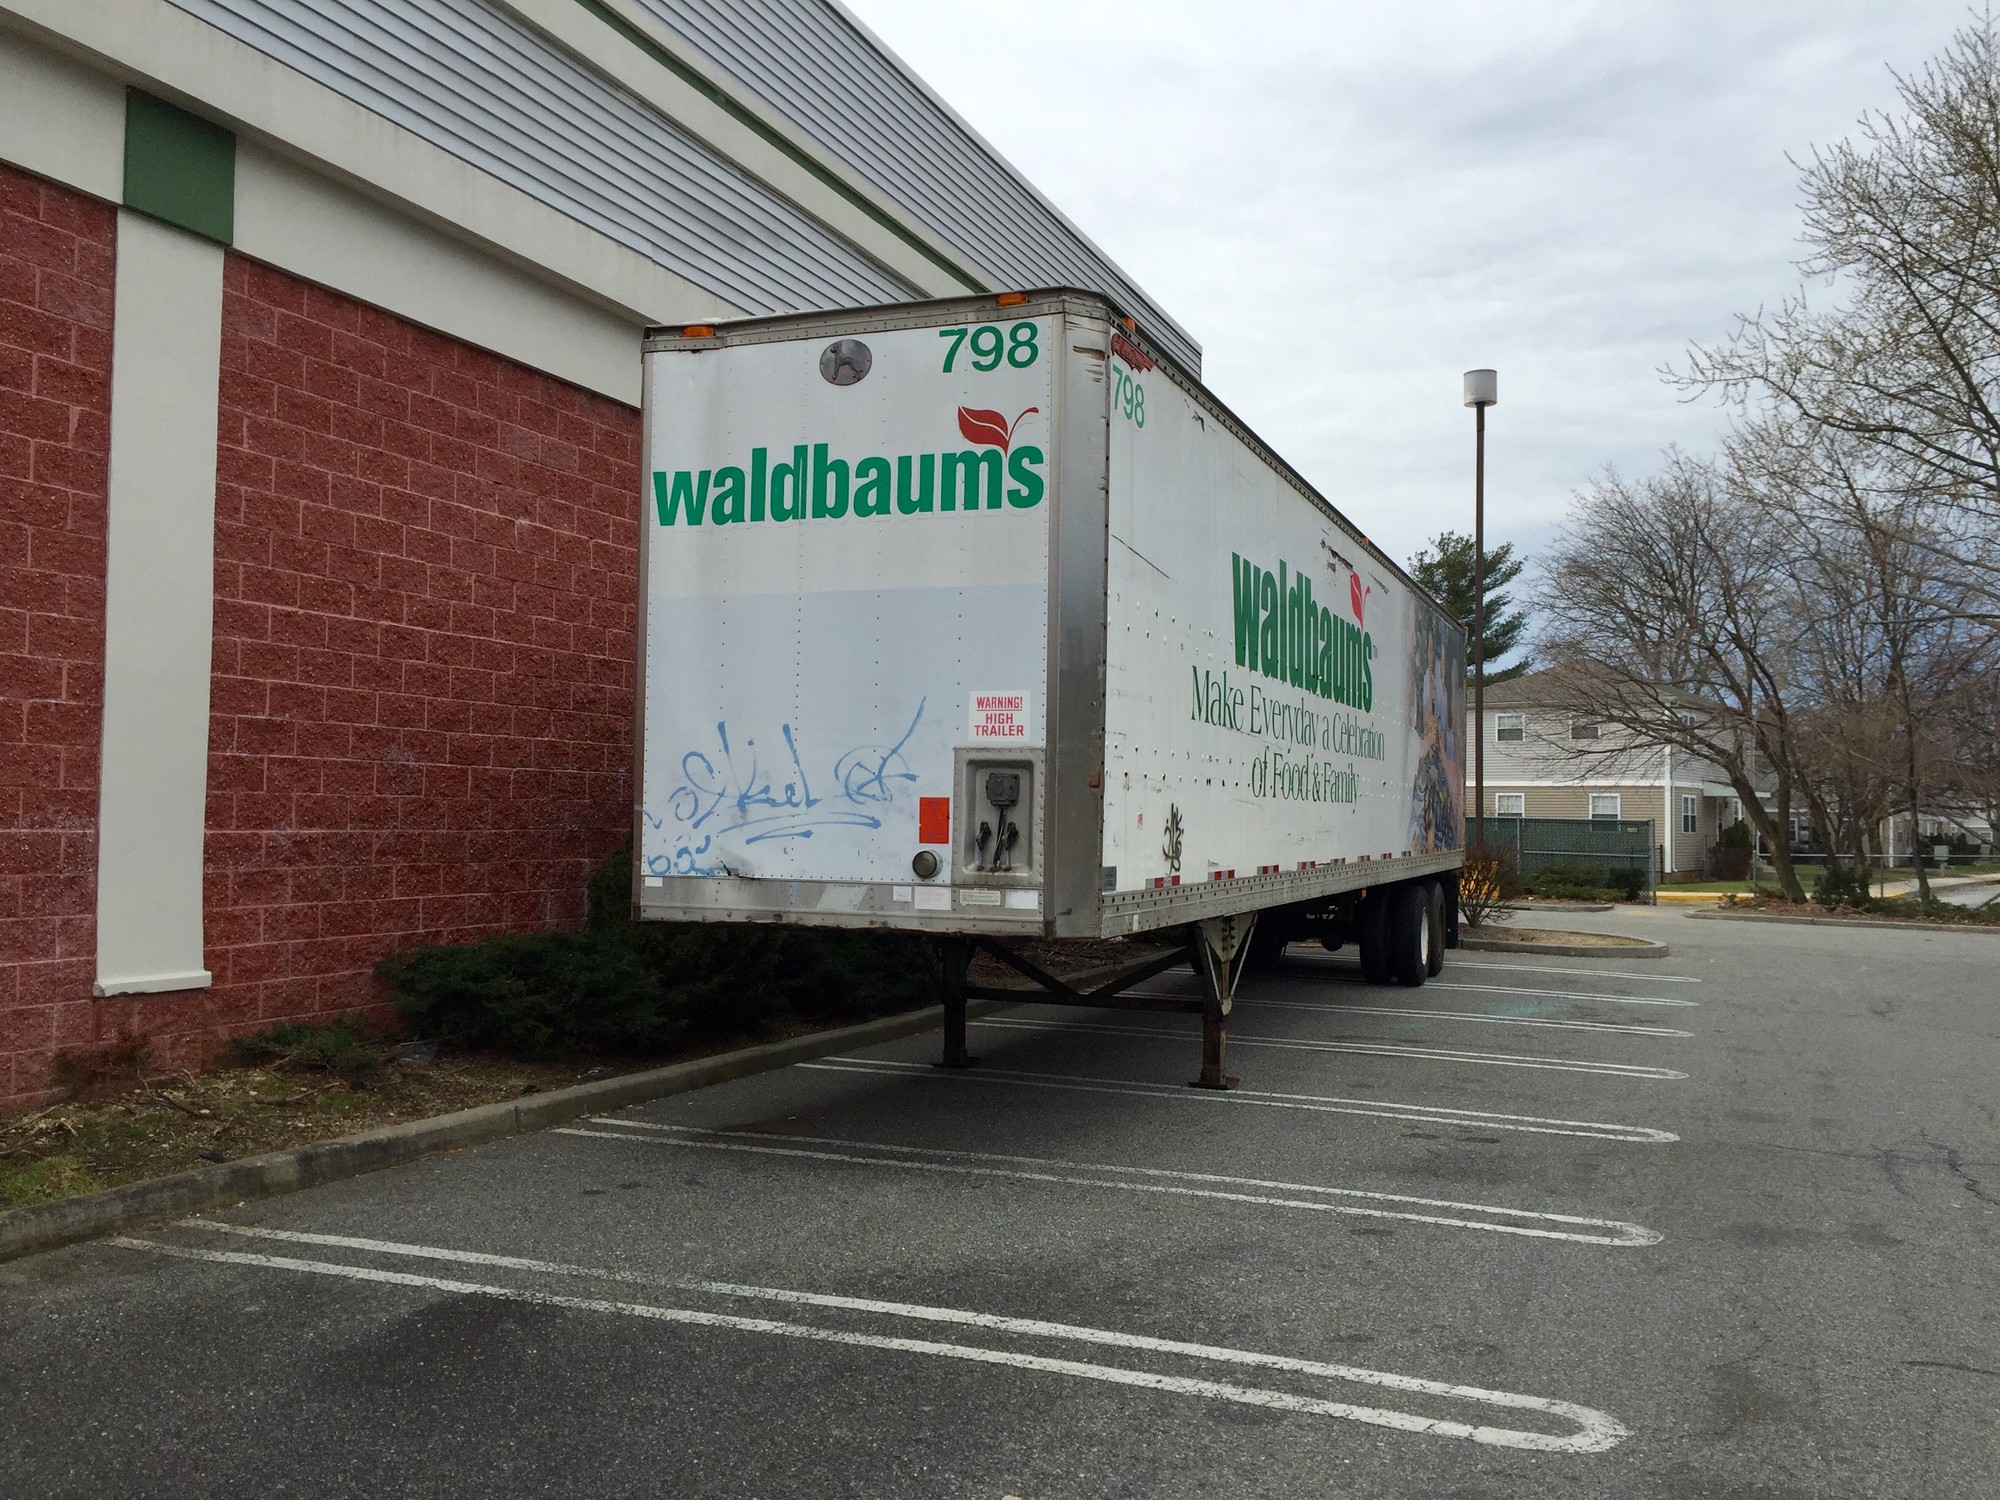 Community members pointed out that a Waldbaum’s trailer, marked with graffiti, sitting on the side of the building.